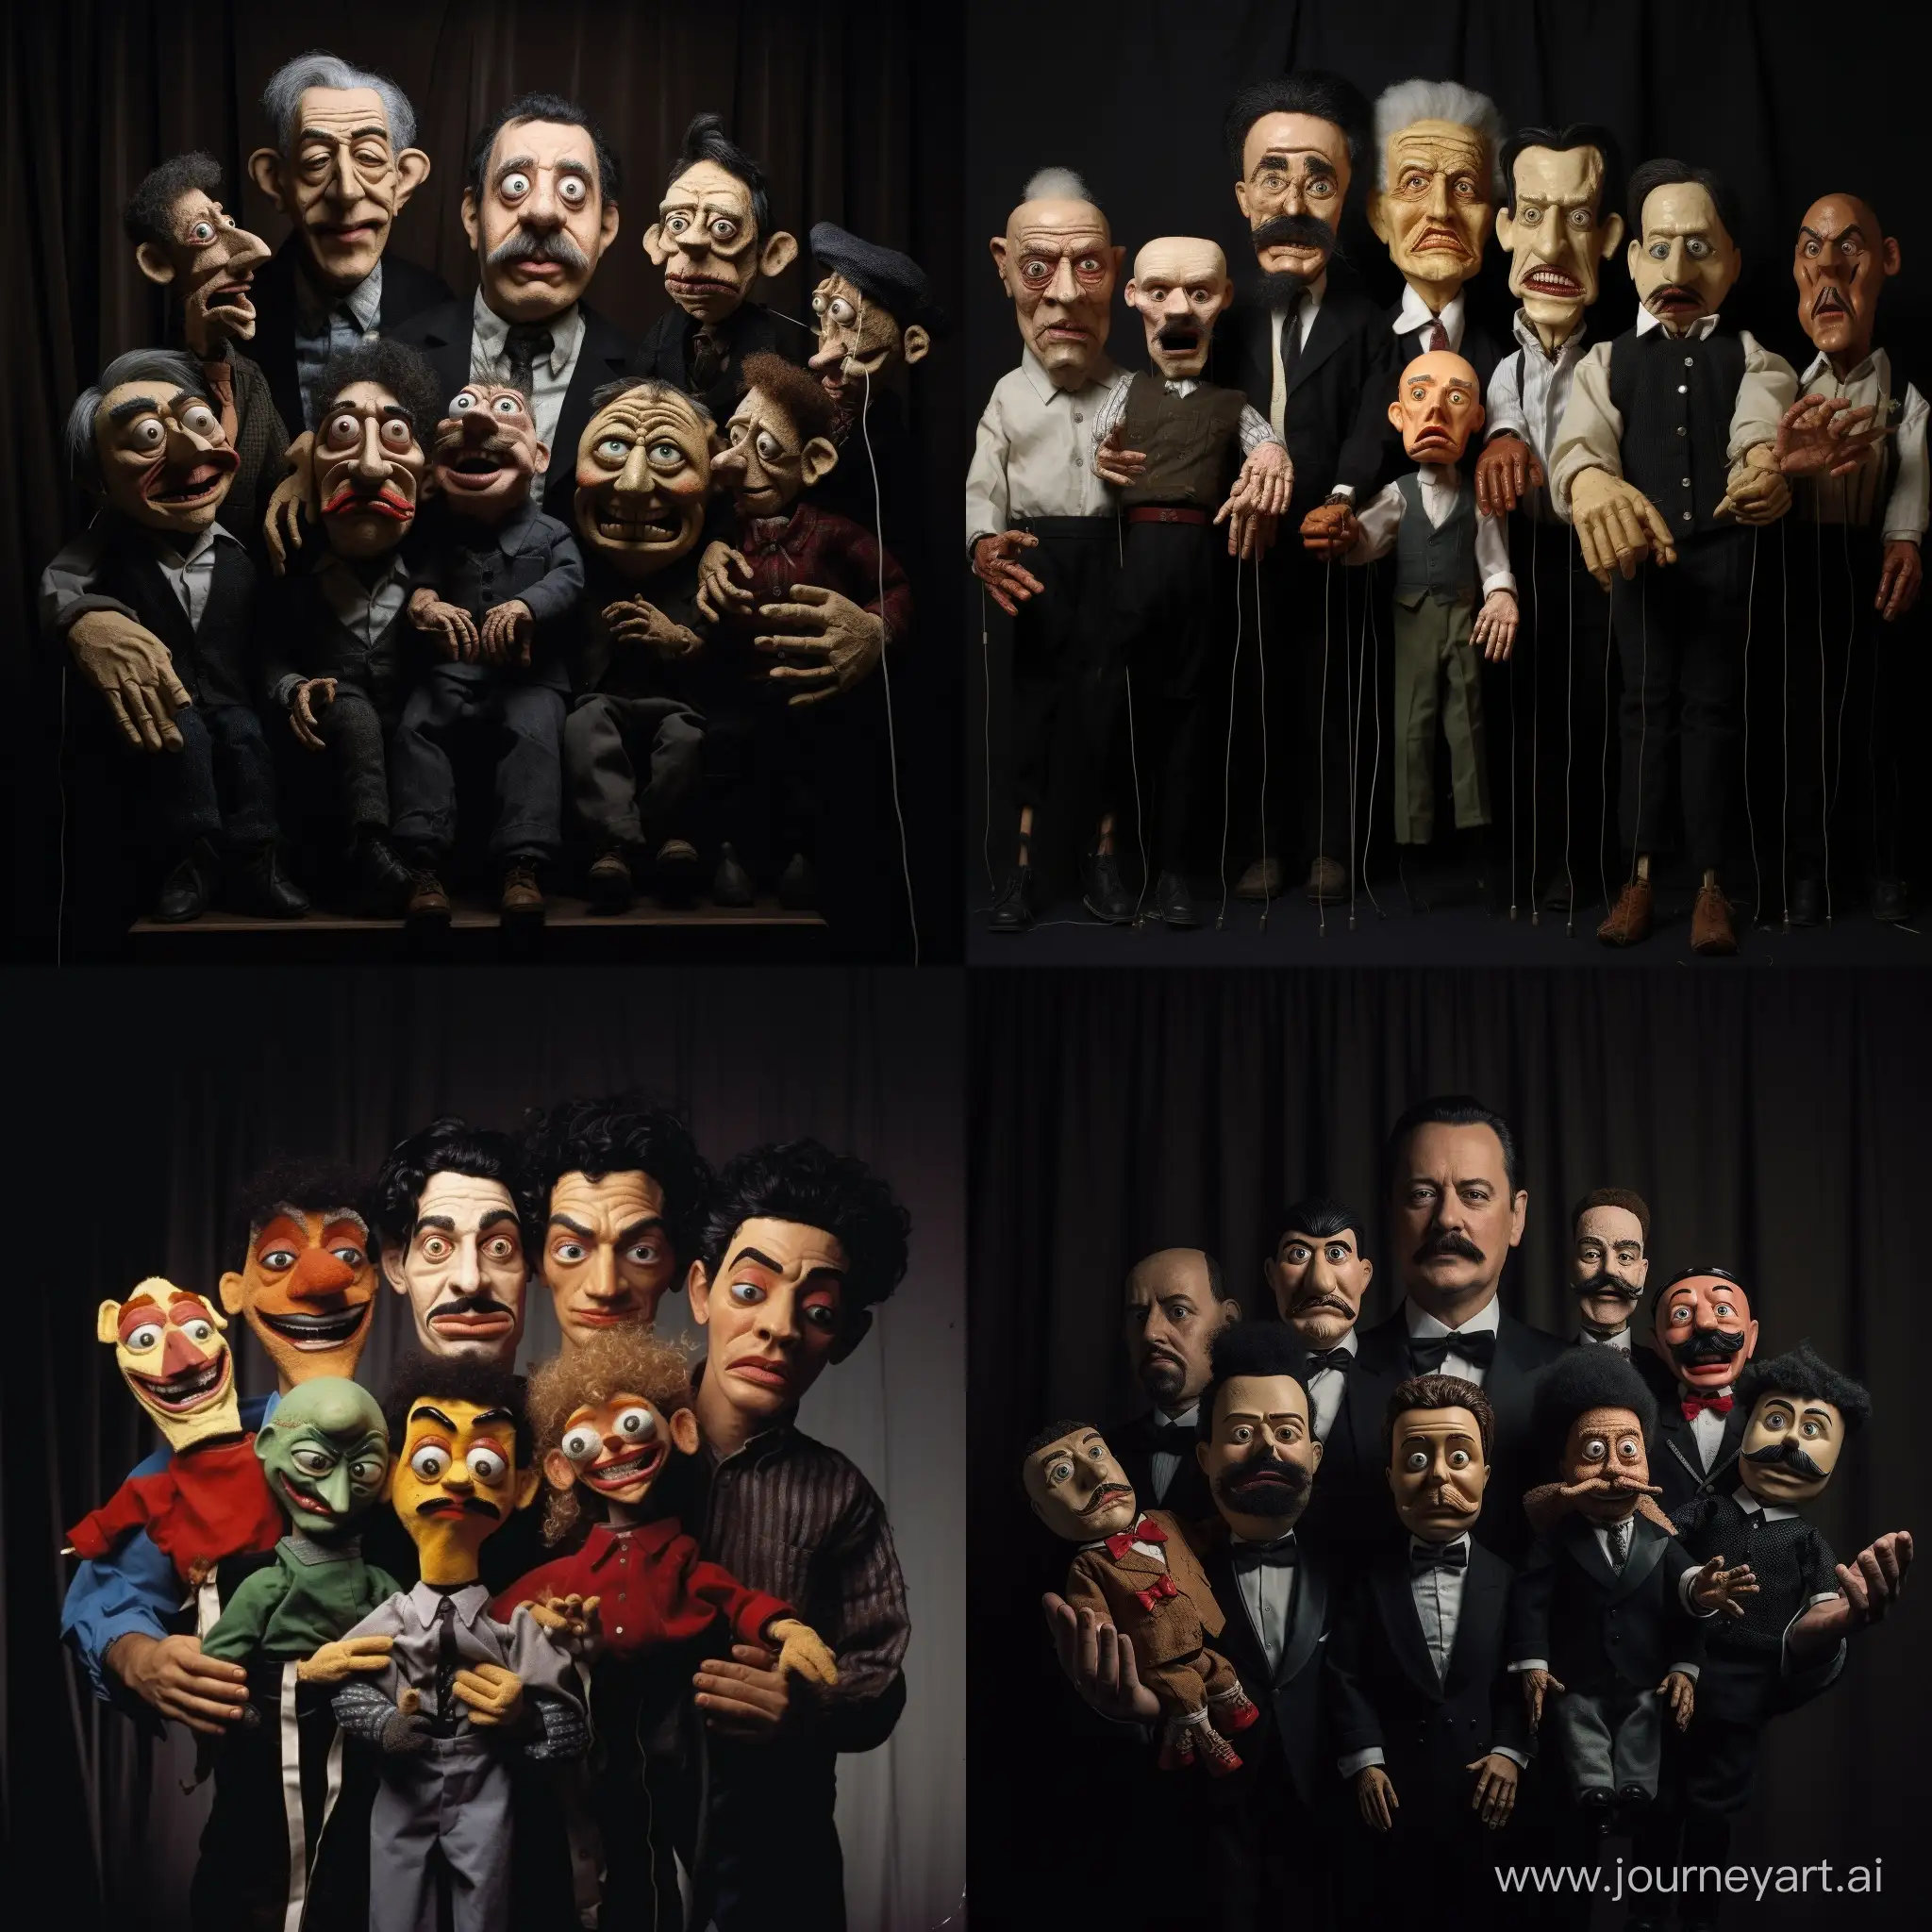 Nested-Puppetry-Intricate-Puppets-Holding-Puppets